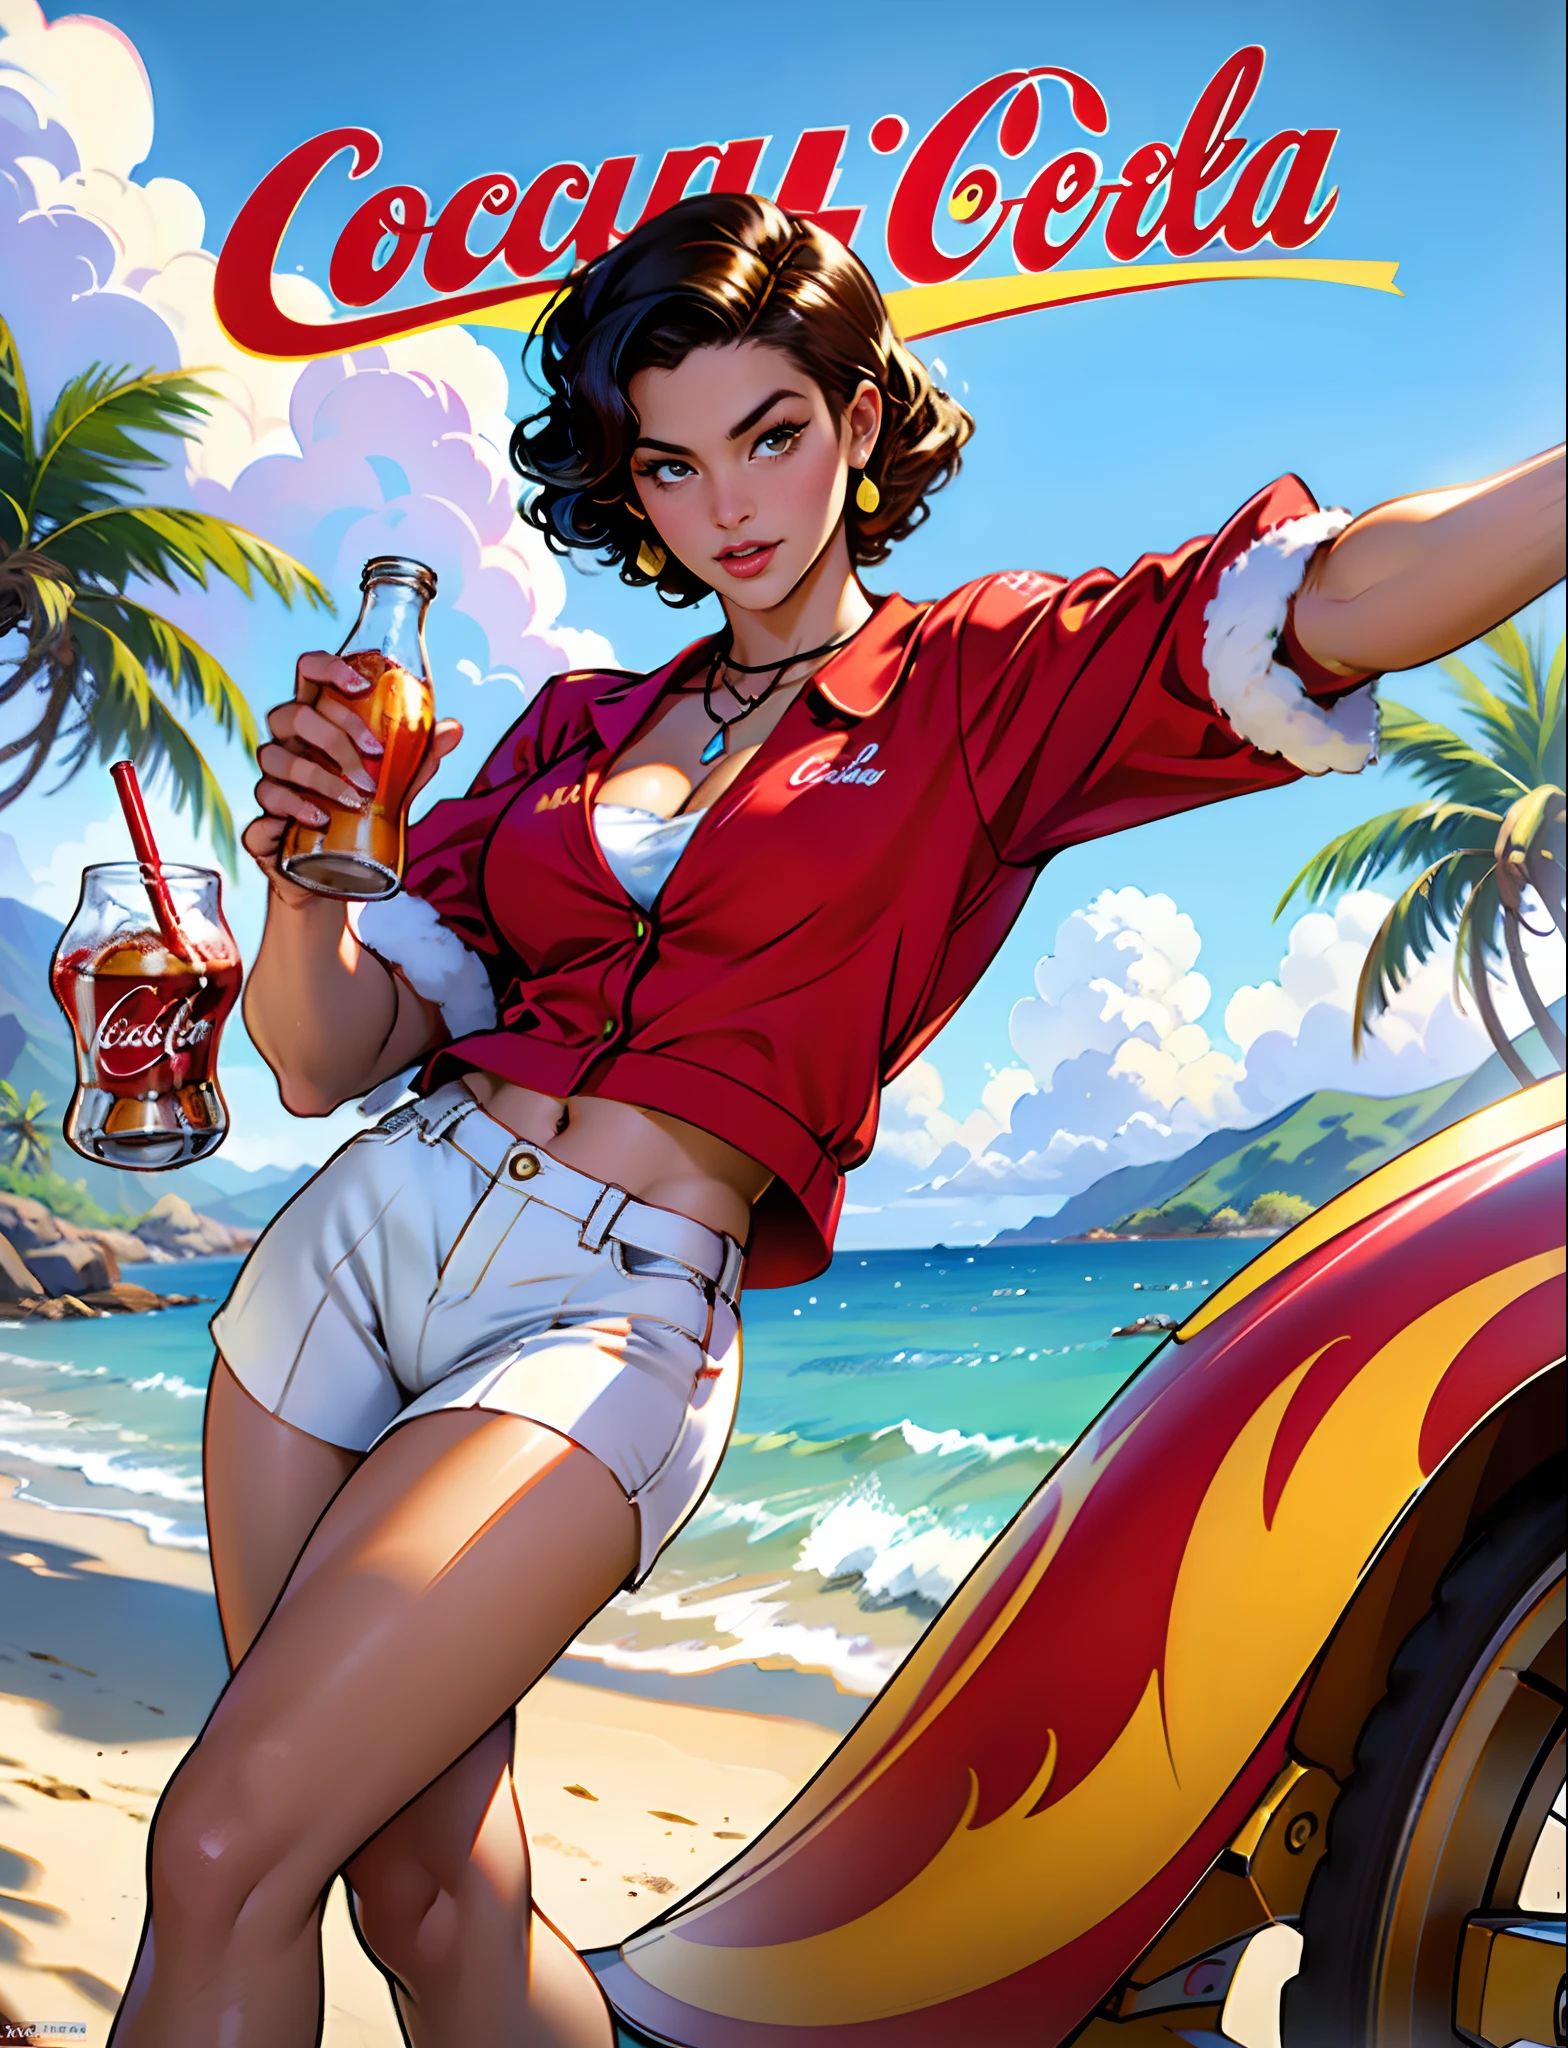 coca cola advert real magic as always five cents, in Hawaii Lahaina, in inspired by Dorothy Coke, coka-cola advertisement, drinking a bottle of coca-cola, soda themed girl, retro poster, retro ad, film noir realistic, in style of digital illustration, promotional poster, inspired by Rolf Armstrong, in style of Jaime Frias, in style of digital art